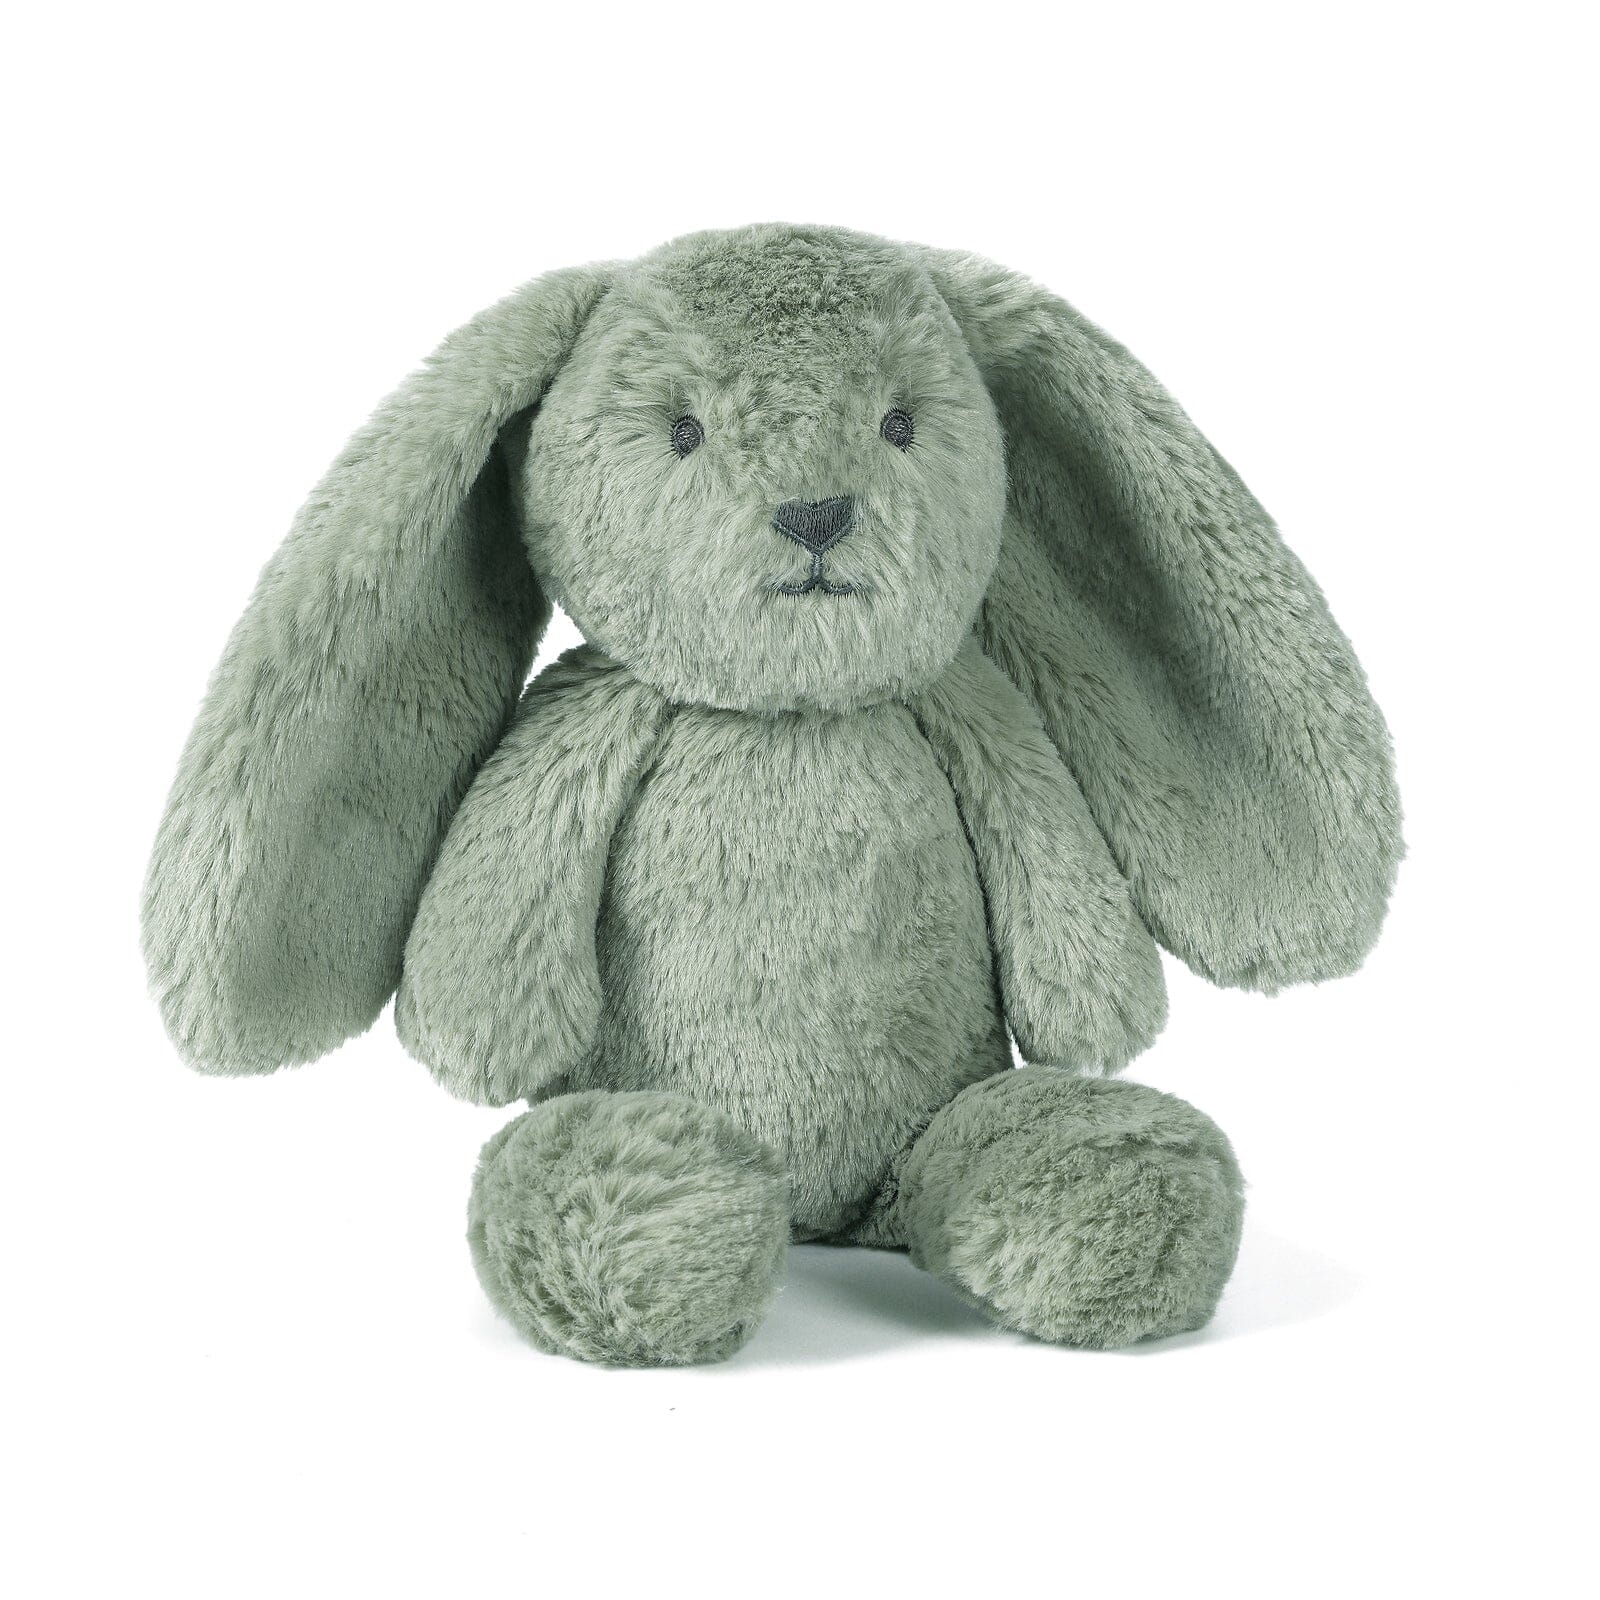 Little Bunny Soft Toy | OB Designs